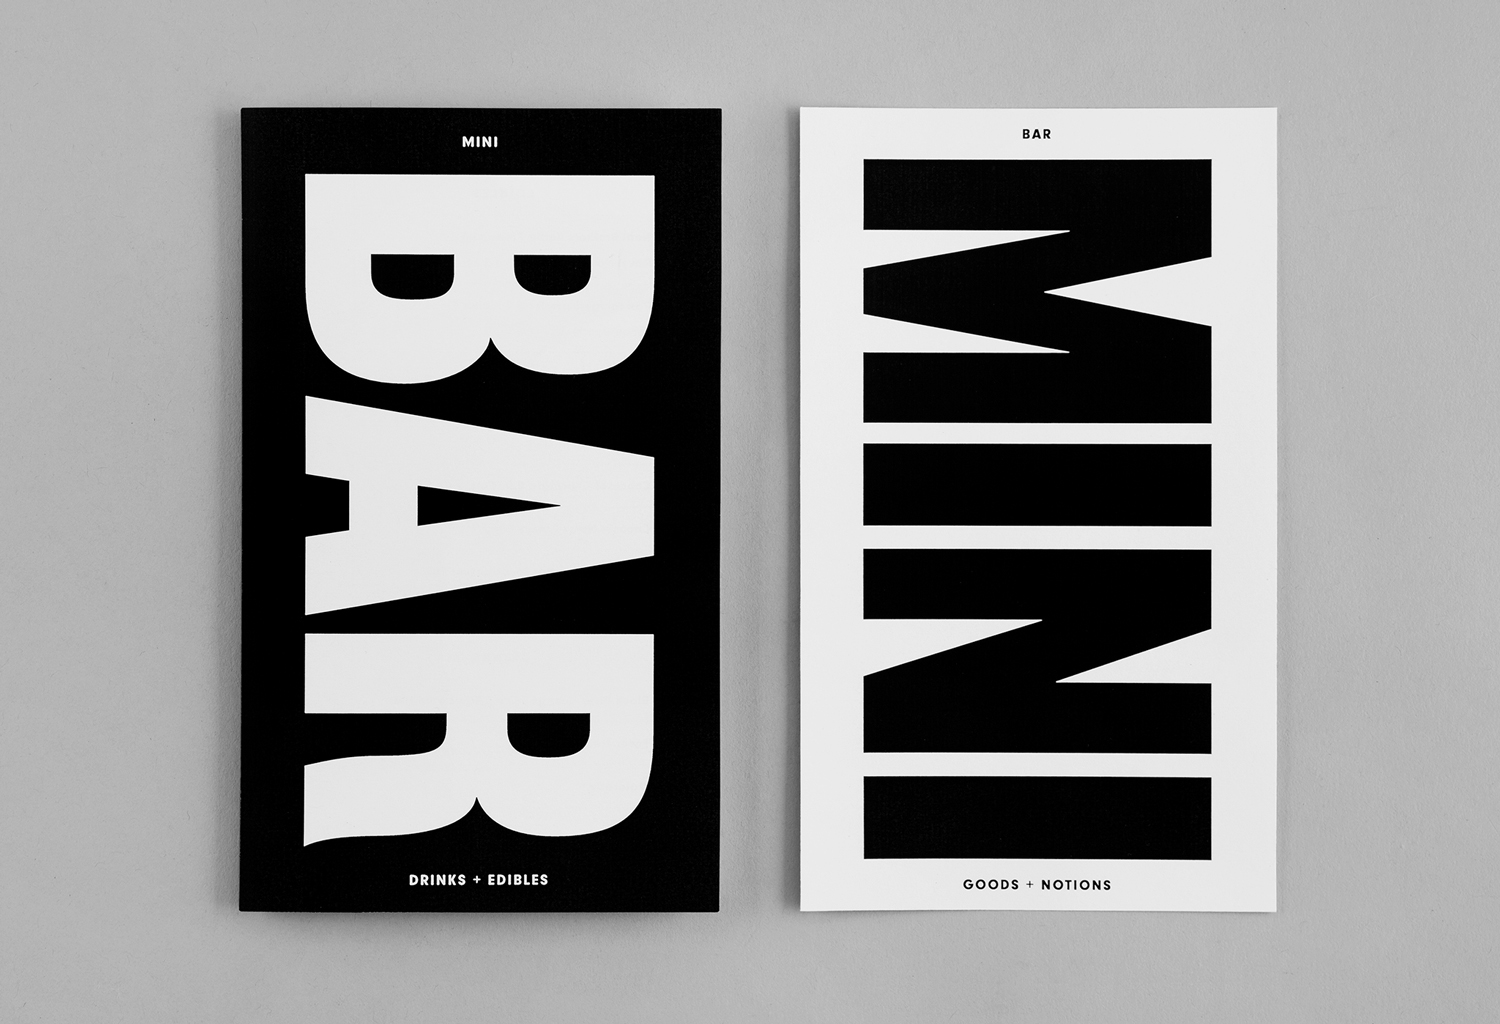 Visual identity and mini bar menus designed by Blok for Toronto's The Broadview Hotel